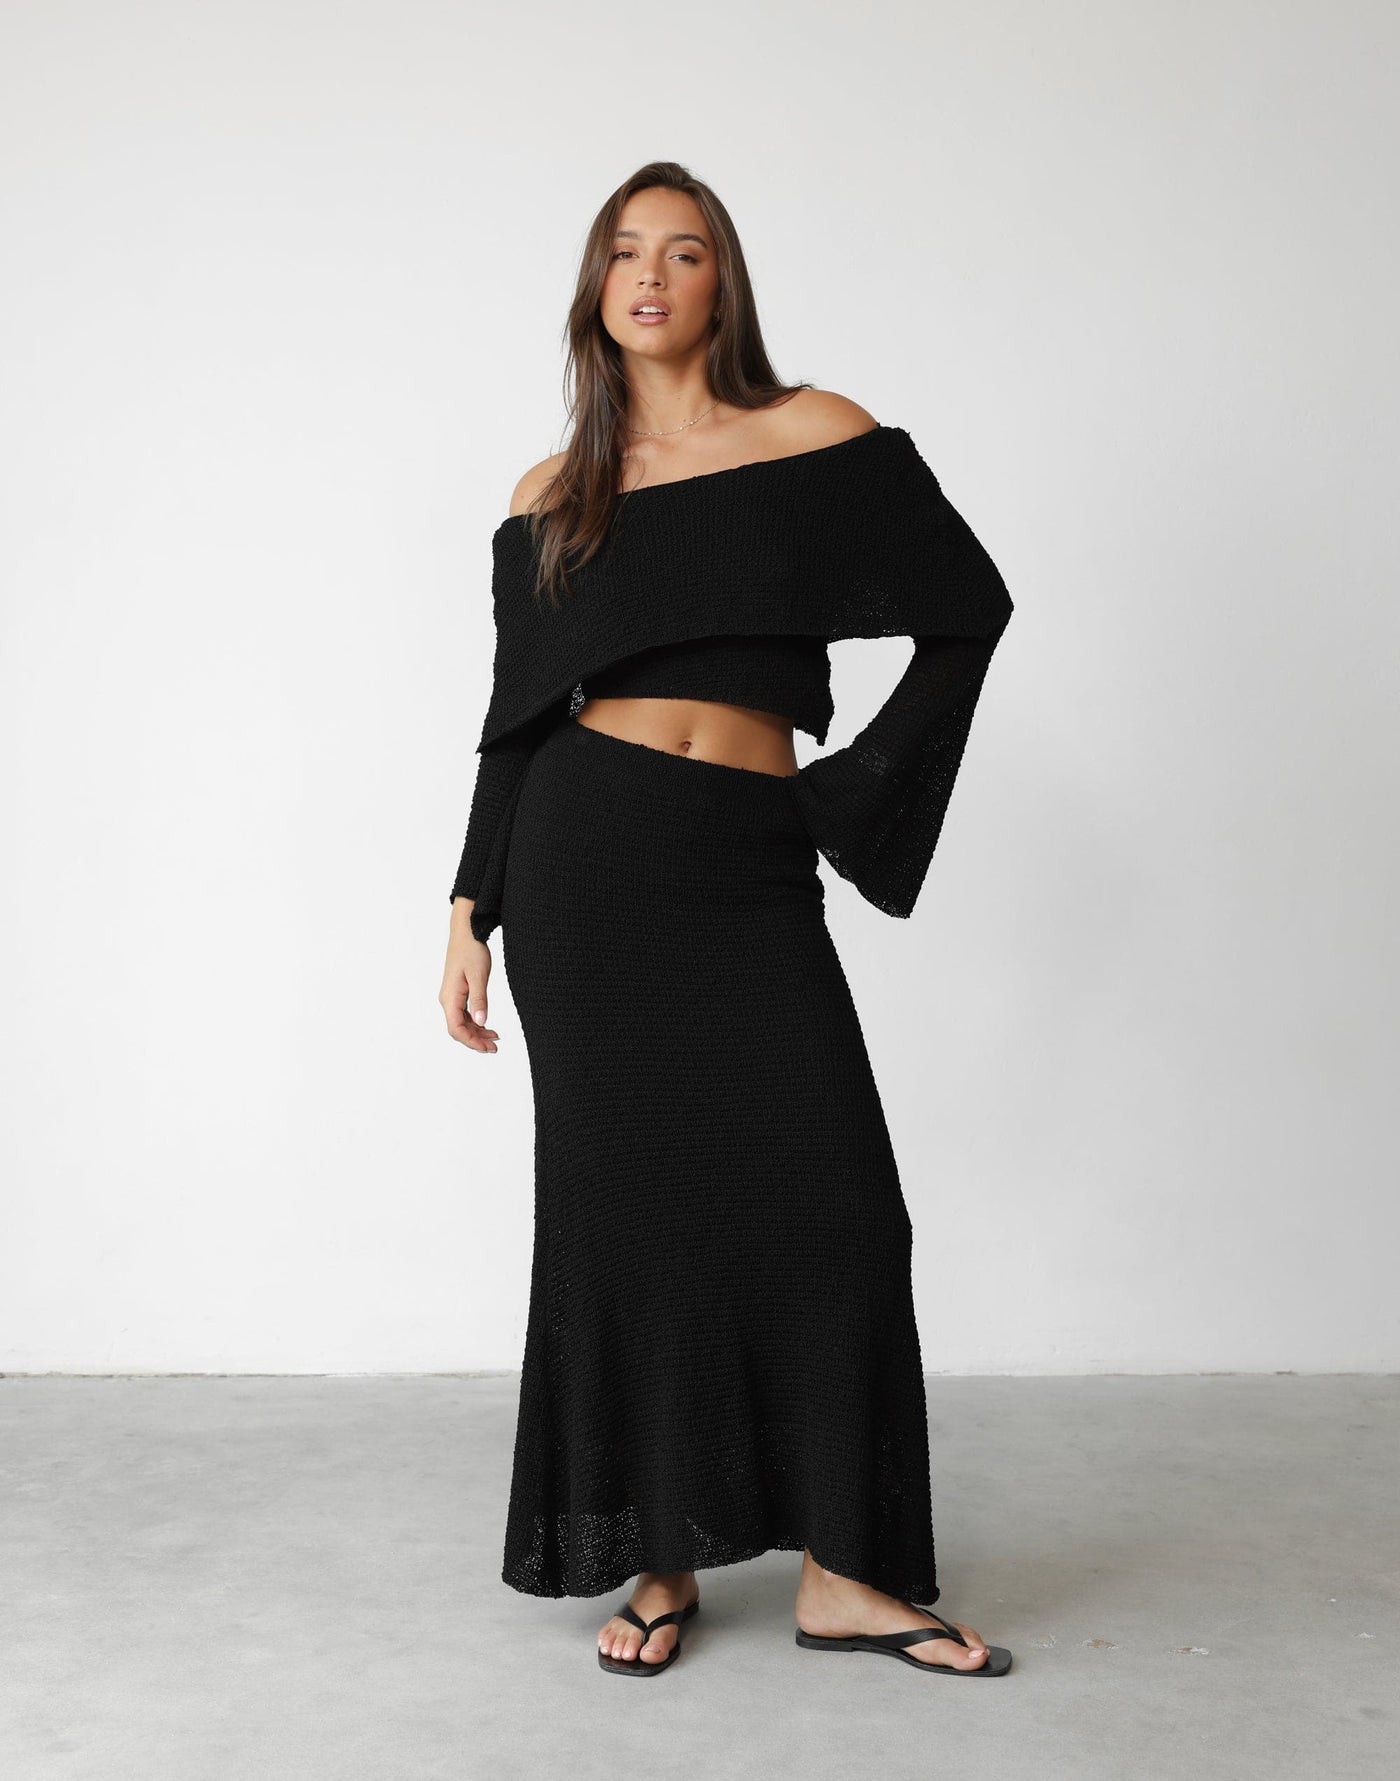 Sundown Top (Black) | Charcoal Clothing Exclusive - Off Shoulder Fold Over Flared Long Sleeved Top - Women's Top - Charcoal Clothing